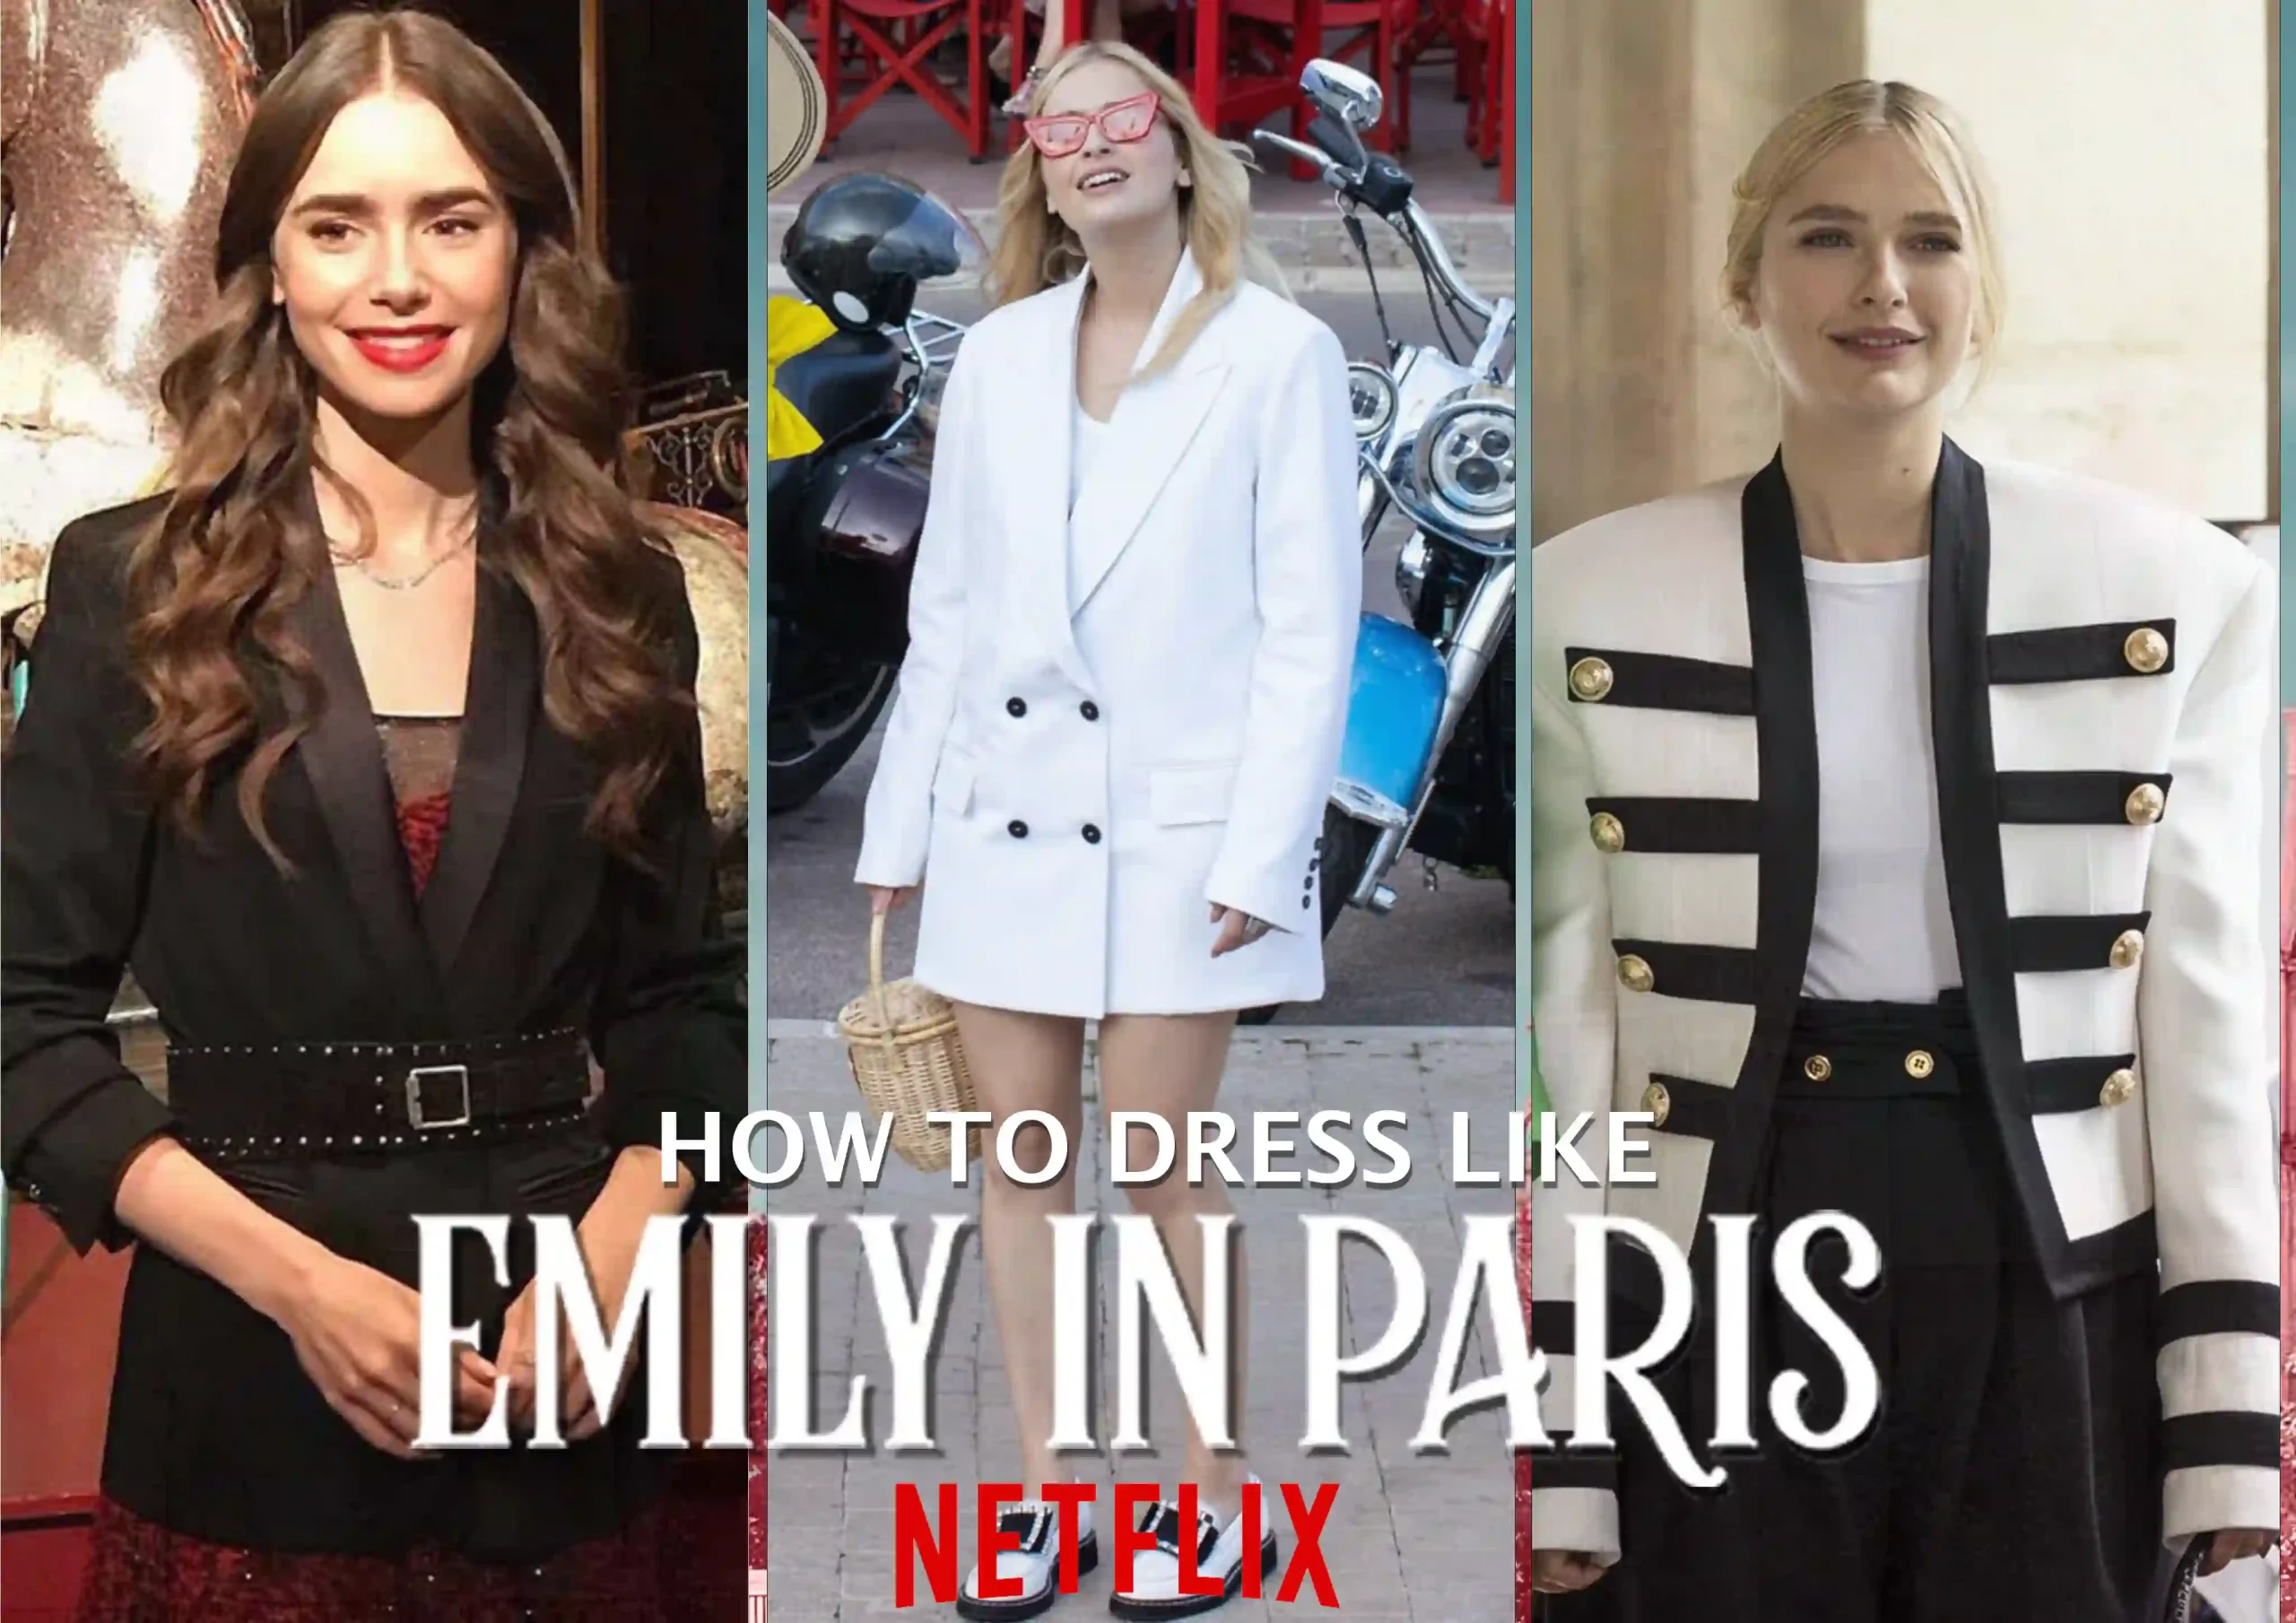 Steal the Look - Dress Like Camille from Emily in Paris